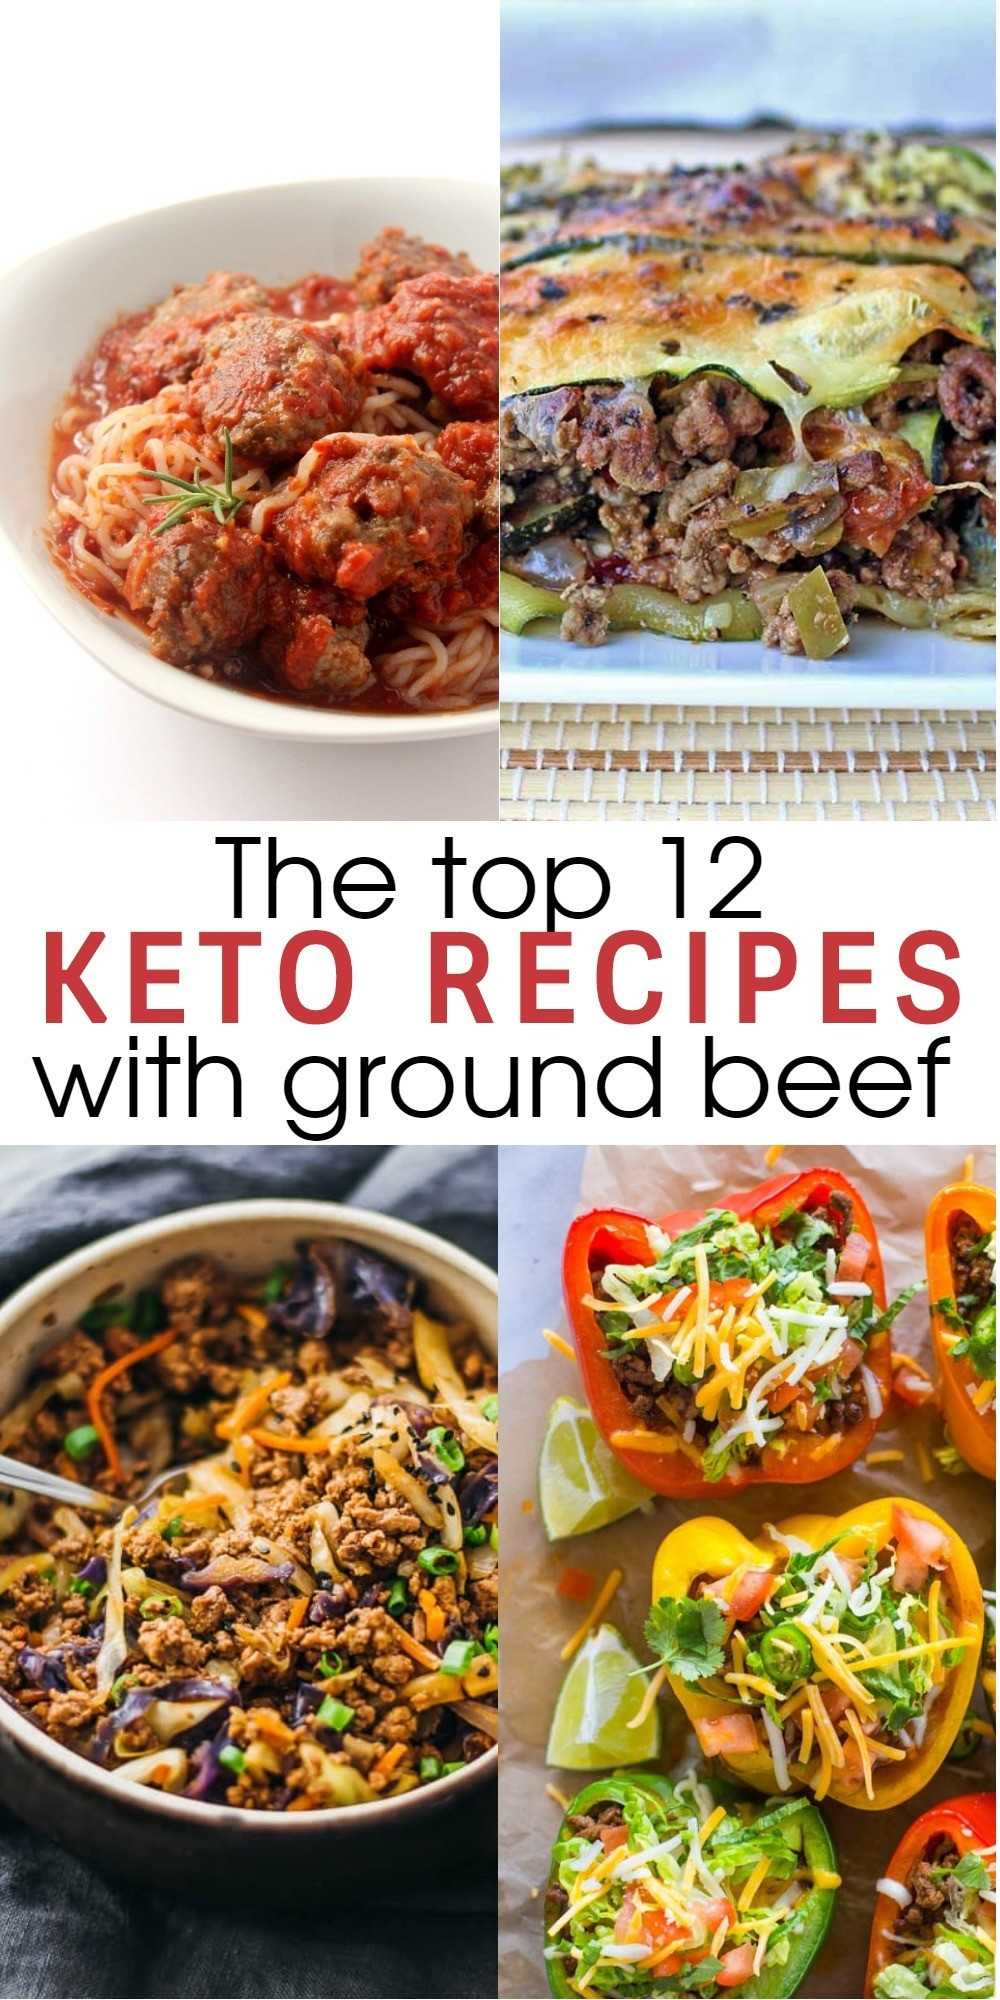 Keto Ground Pork Recipes
 12 Flavorful and Easy Keto Recipes With Ground Beef To Try